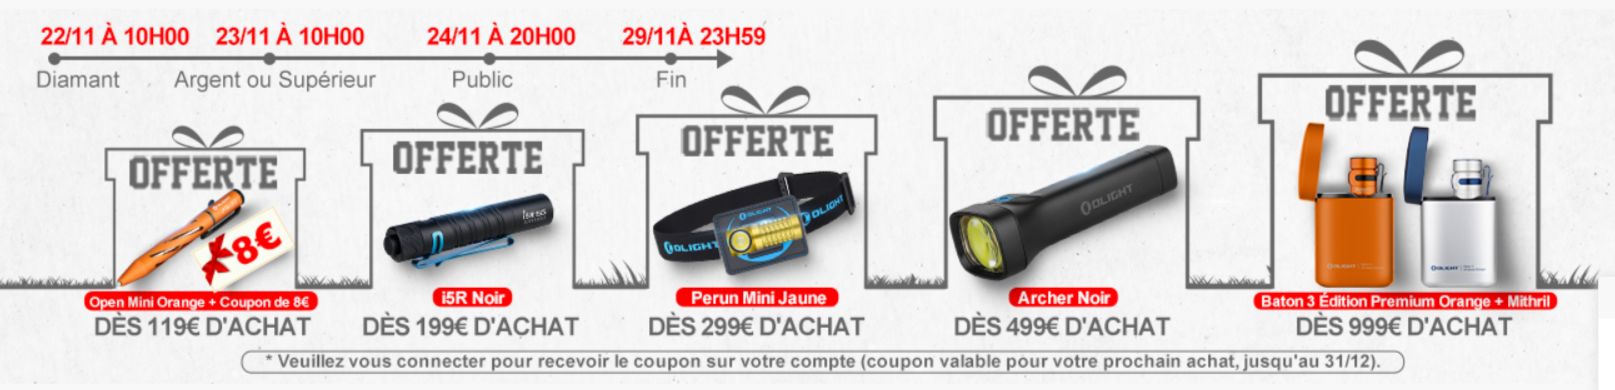 Olight-Lampe-Torche-Lampe-Tactique-Lampe-Frontale-Olight-France.png